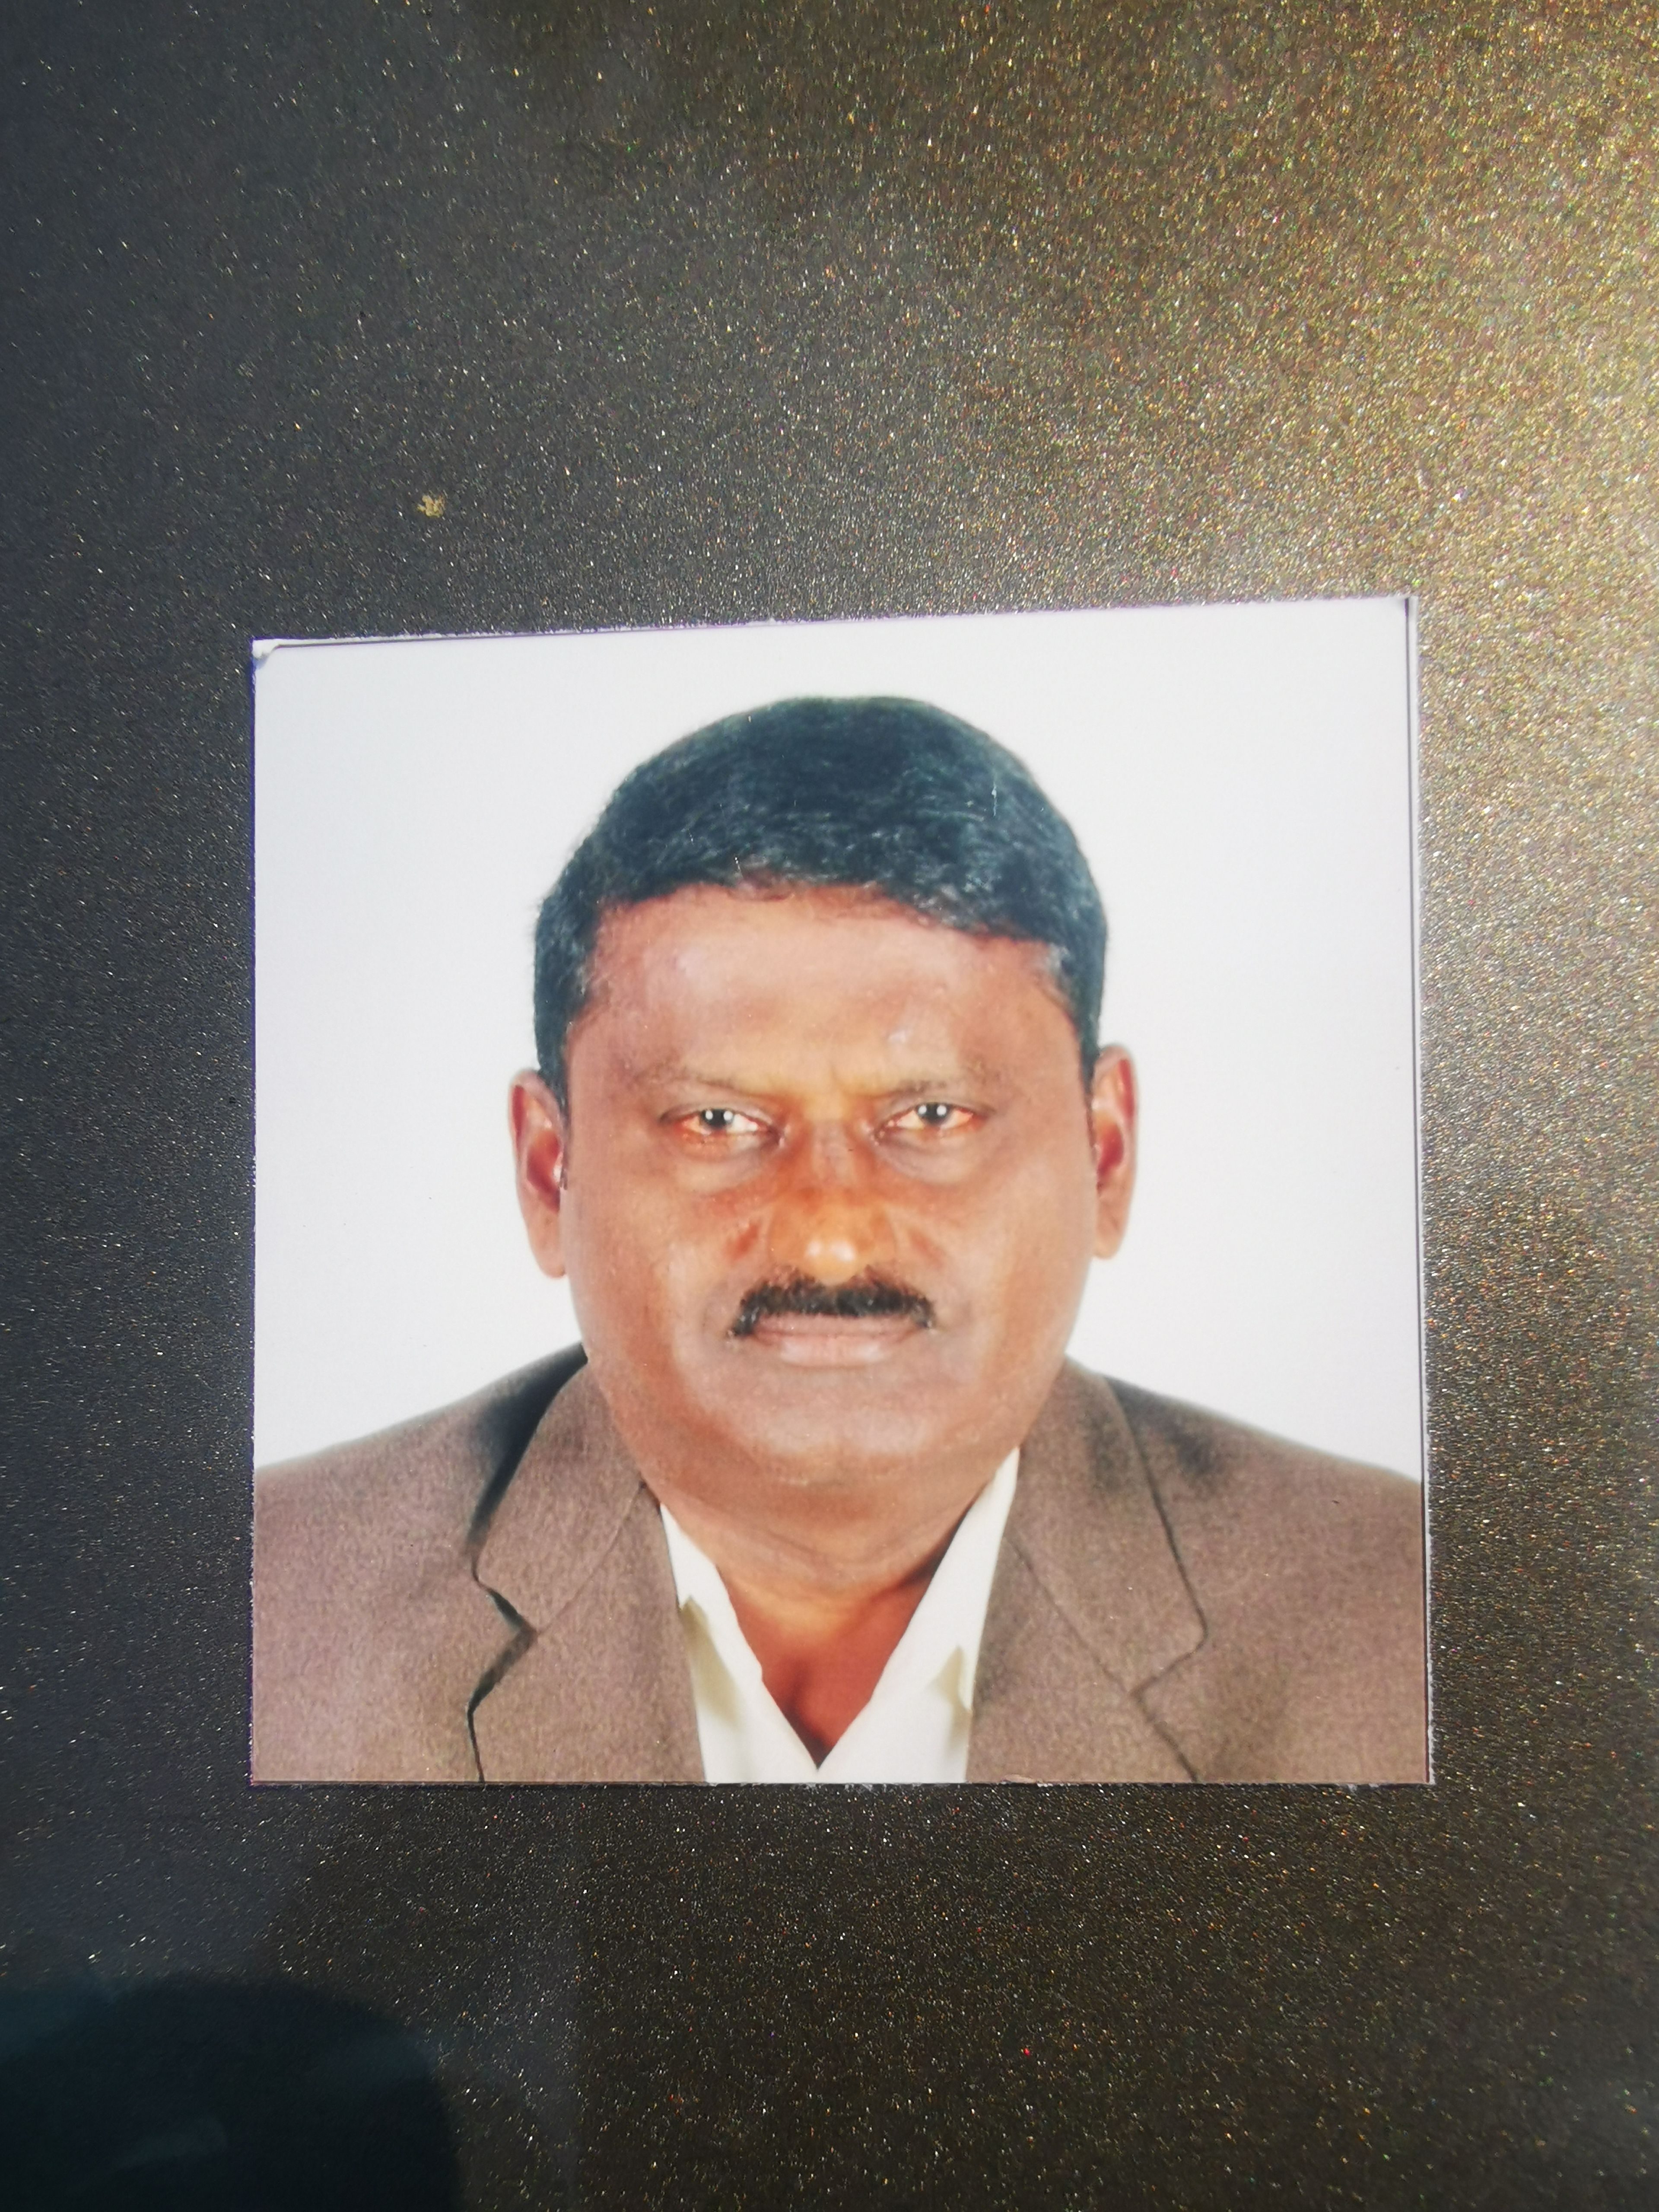 Moorthy A/L Perumal, 56, in a passport photo. He has brown skin, black short hair and a black mustache. He is wearing a brown jacket and a white shirt.